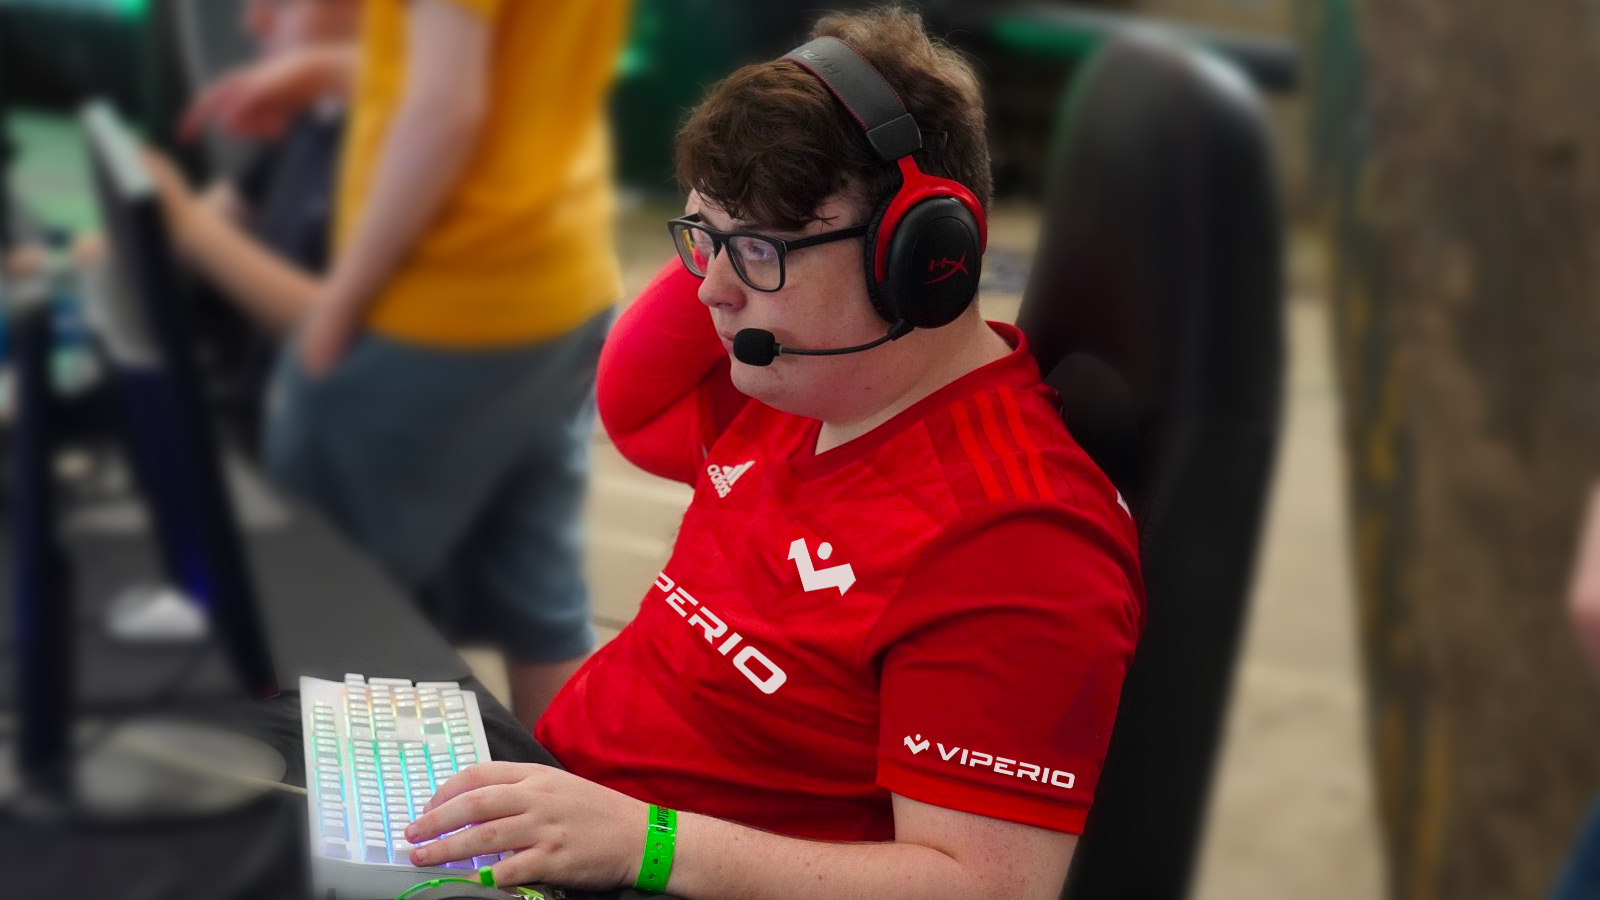 Bevve joins Viperio CSGO, Ping moves to substitute role